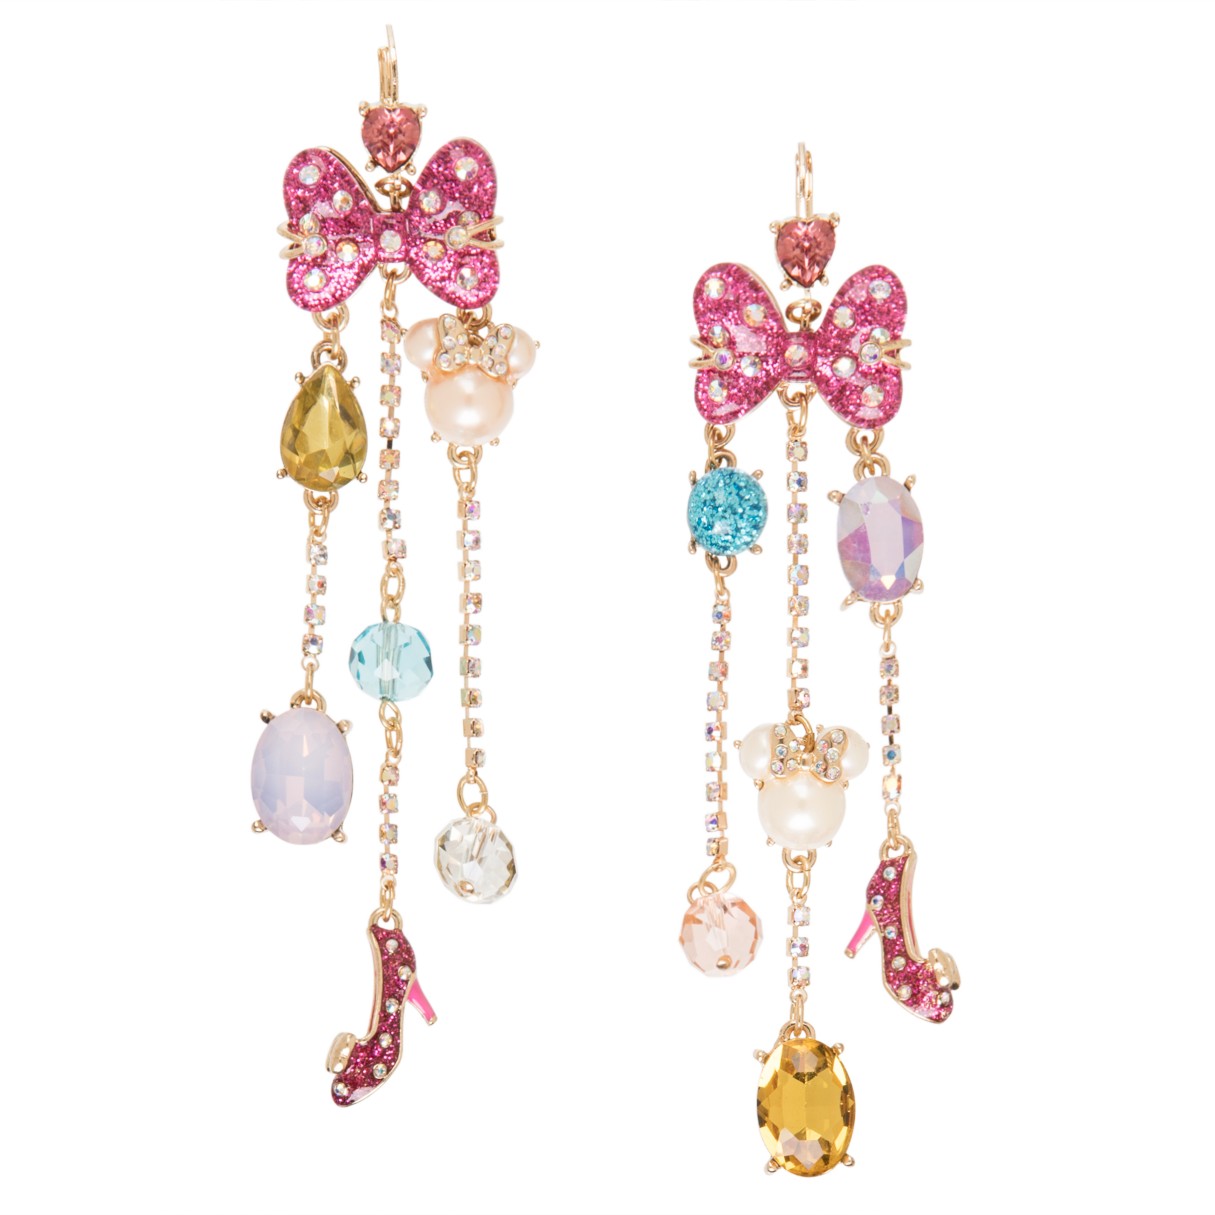 Minnie Mouse Cluster Earrings by Betsey Johnson